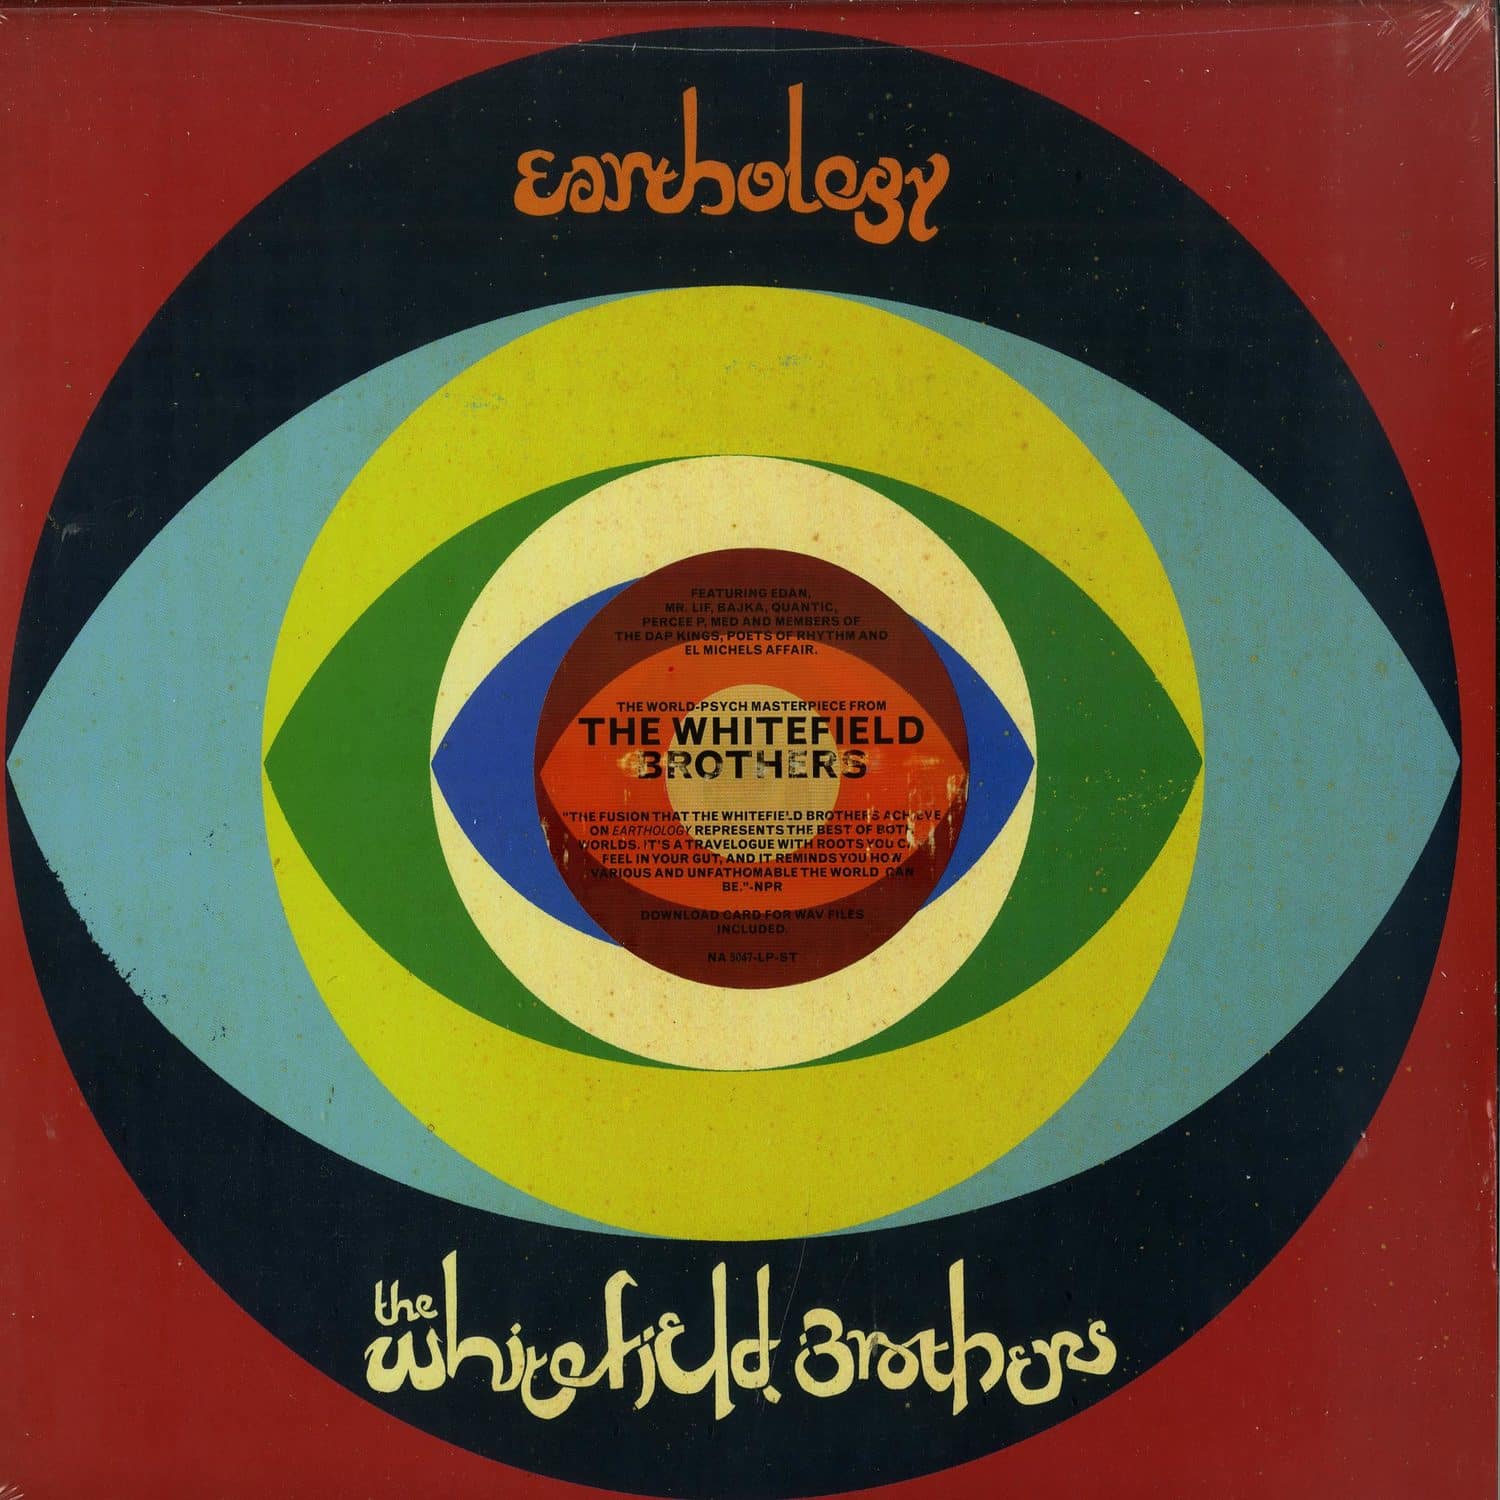 Whitefield Brothers - EARTHOLOGY 